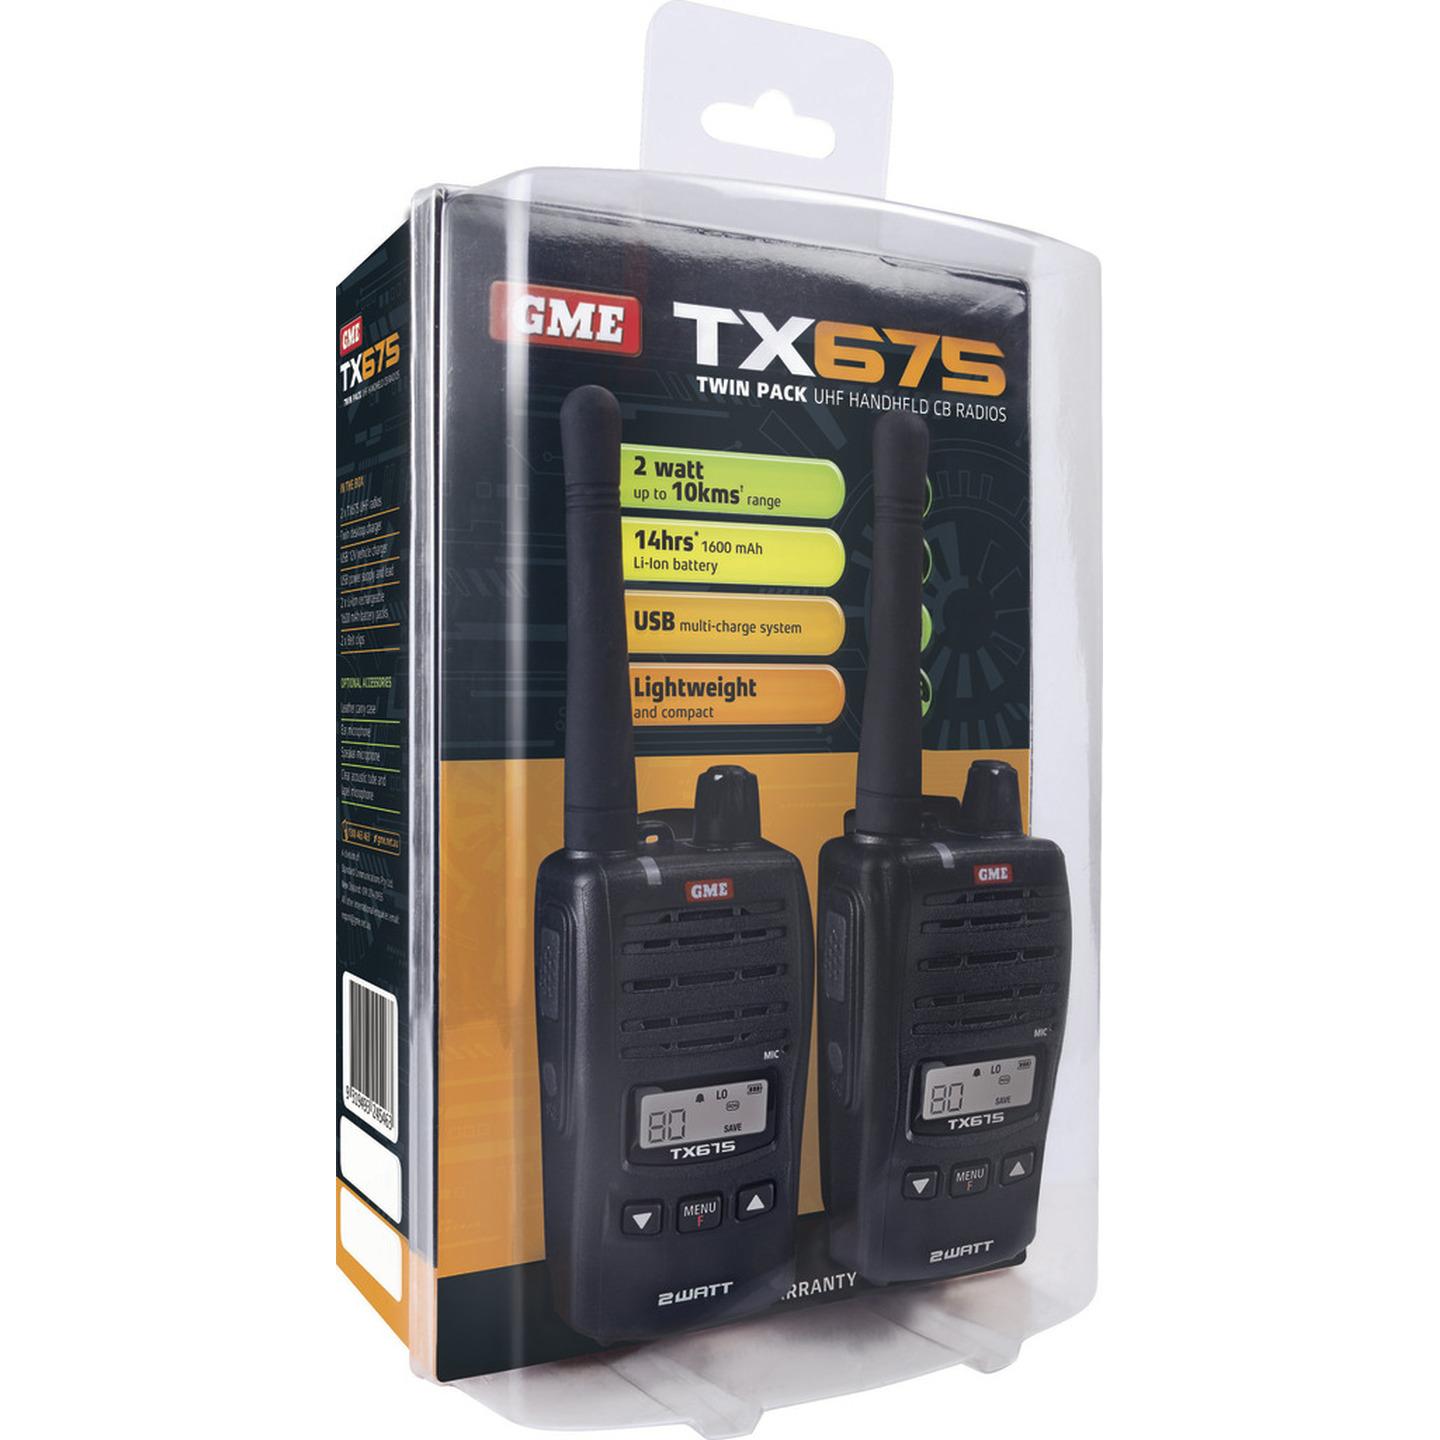 GME 2W UHF Transceiver Twin Pack TX675TP